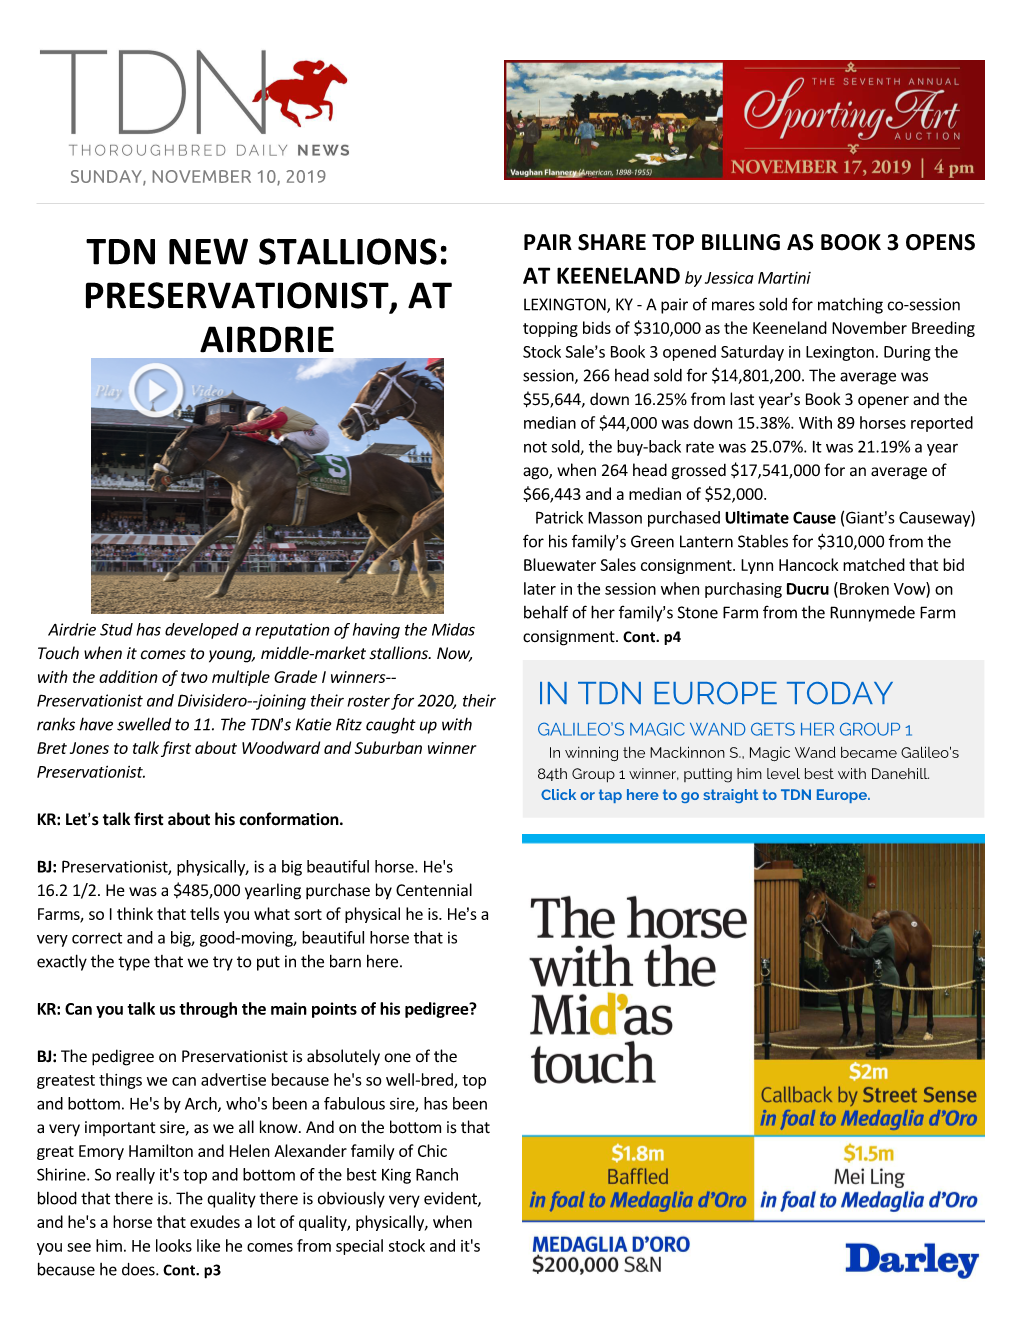 Tdn New Stallions: Preservationist, at Airdrie